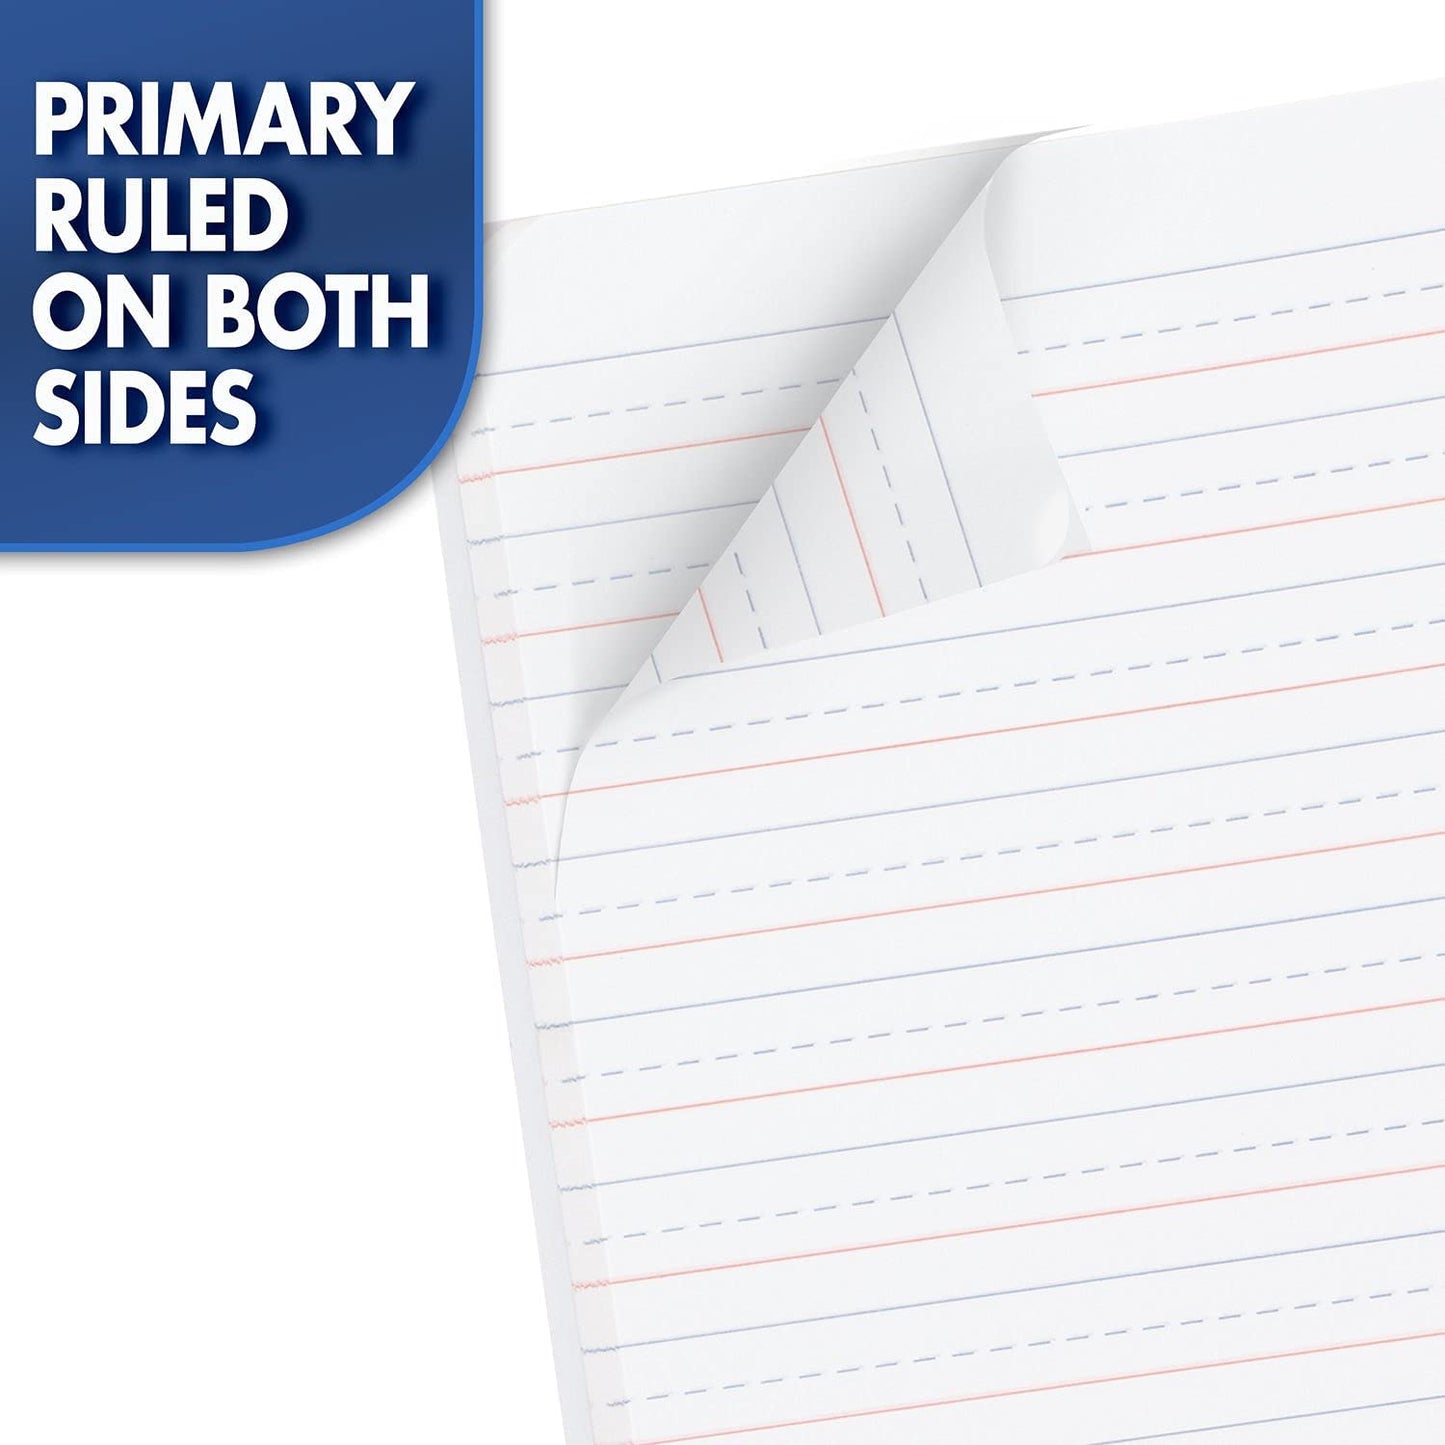 Primary Composition Notebook, Wide Ruled Paper, Grades K-2 Writing Workbook, 9-3/4" X 7-1/2", 100 Sheets, Blue Marble (09902)